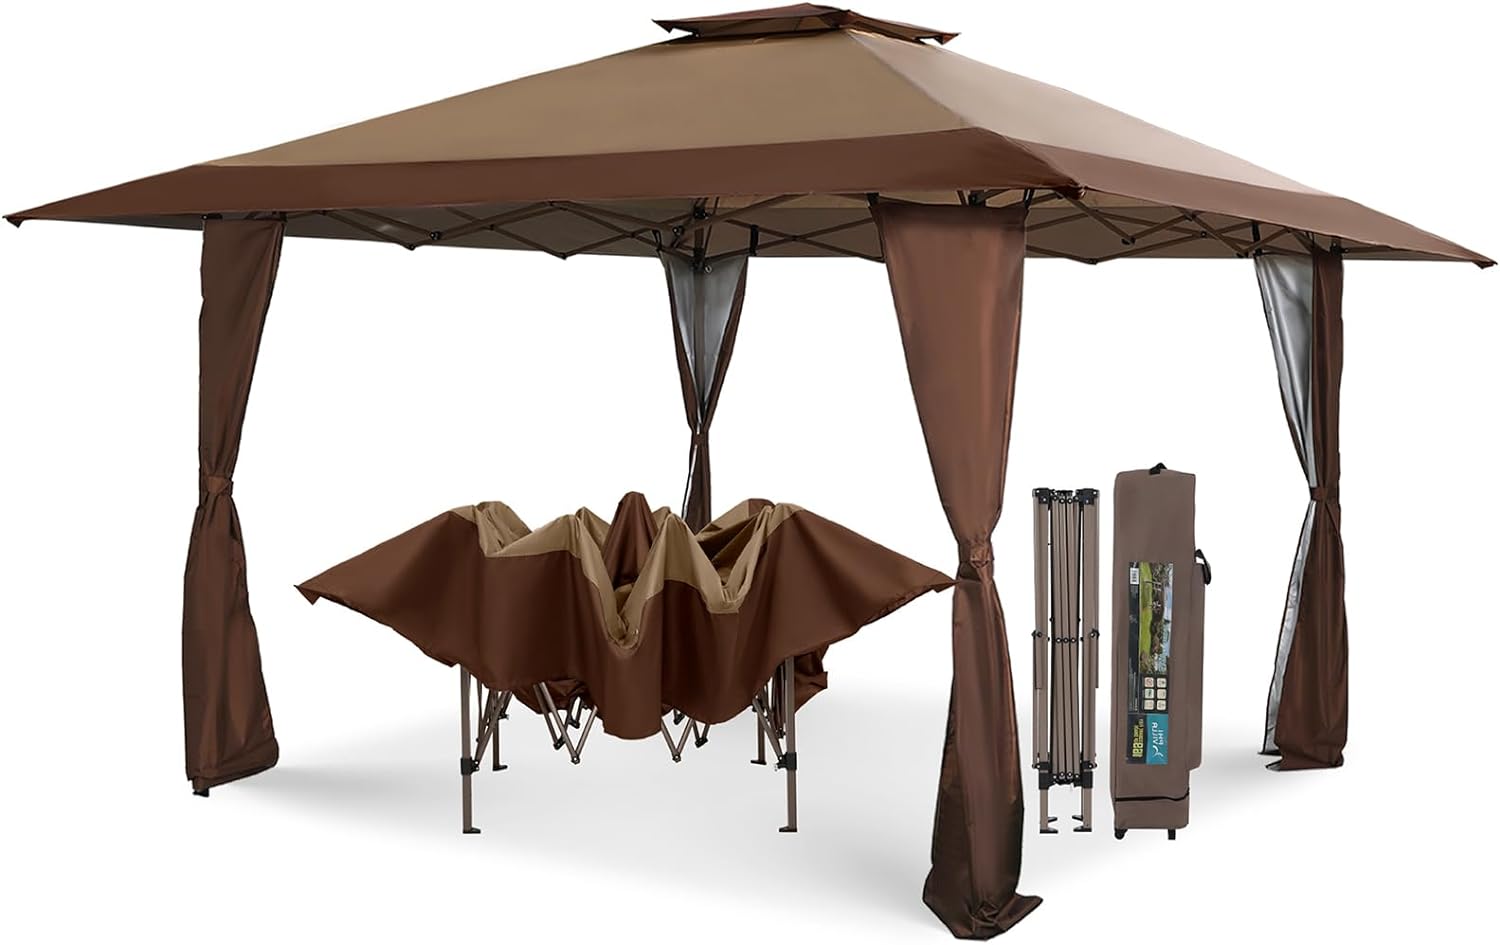 PHI VILLA 13' x 13' Patio Gazebo Tent Outdoor Pop-up Canopy Shelter with Elegant Corner Curtain for Backyard, Party, Family Outings, 169 Sq. Ft of Shade, Brown